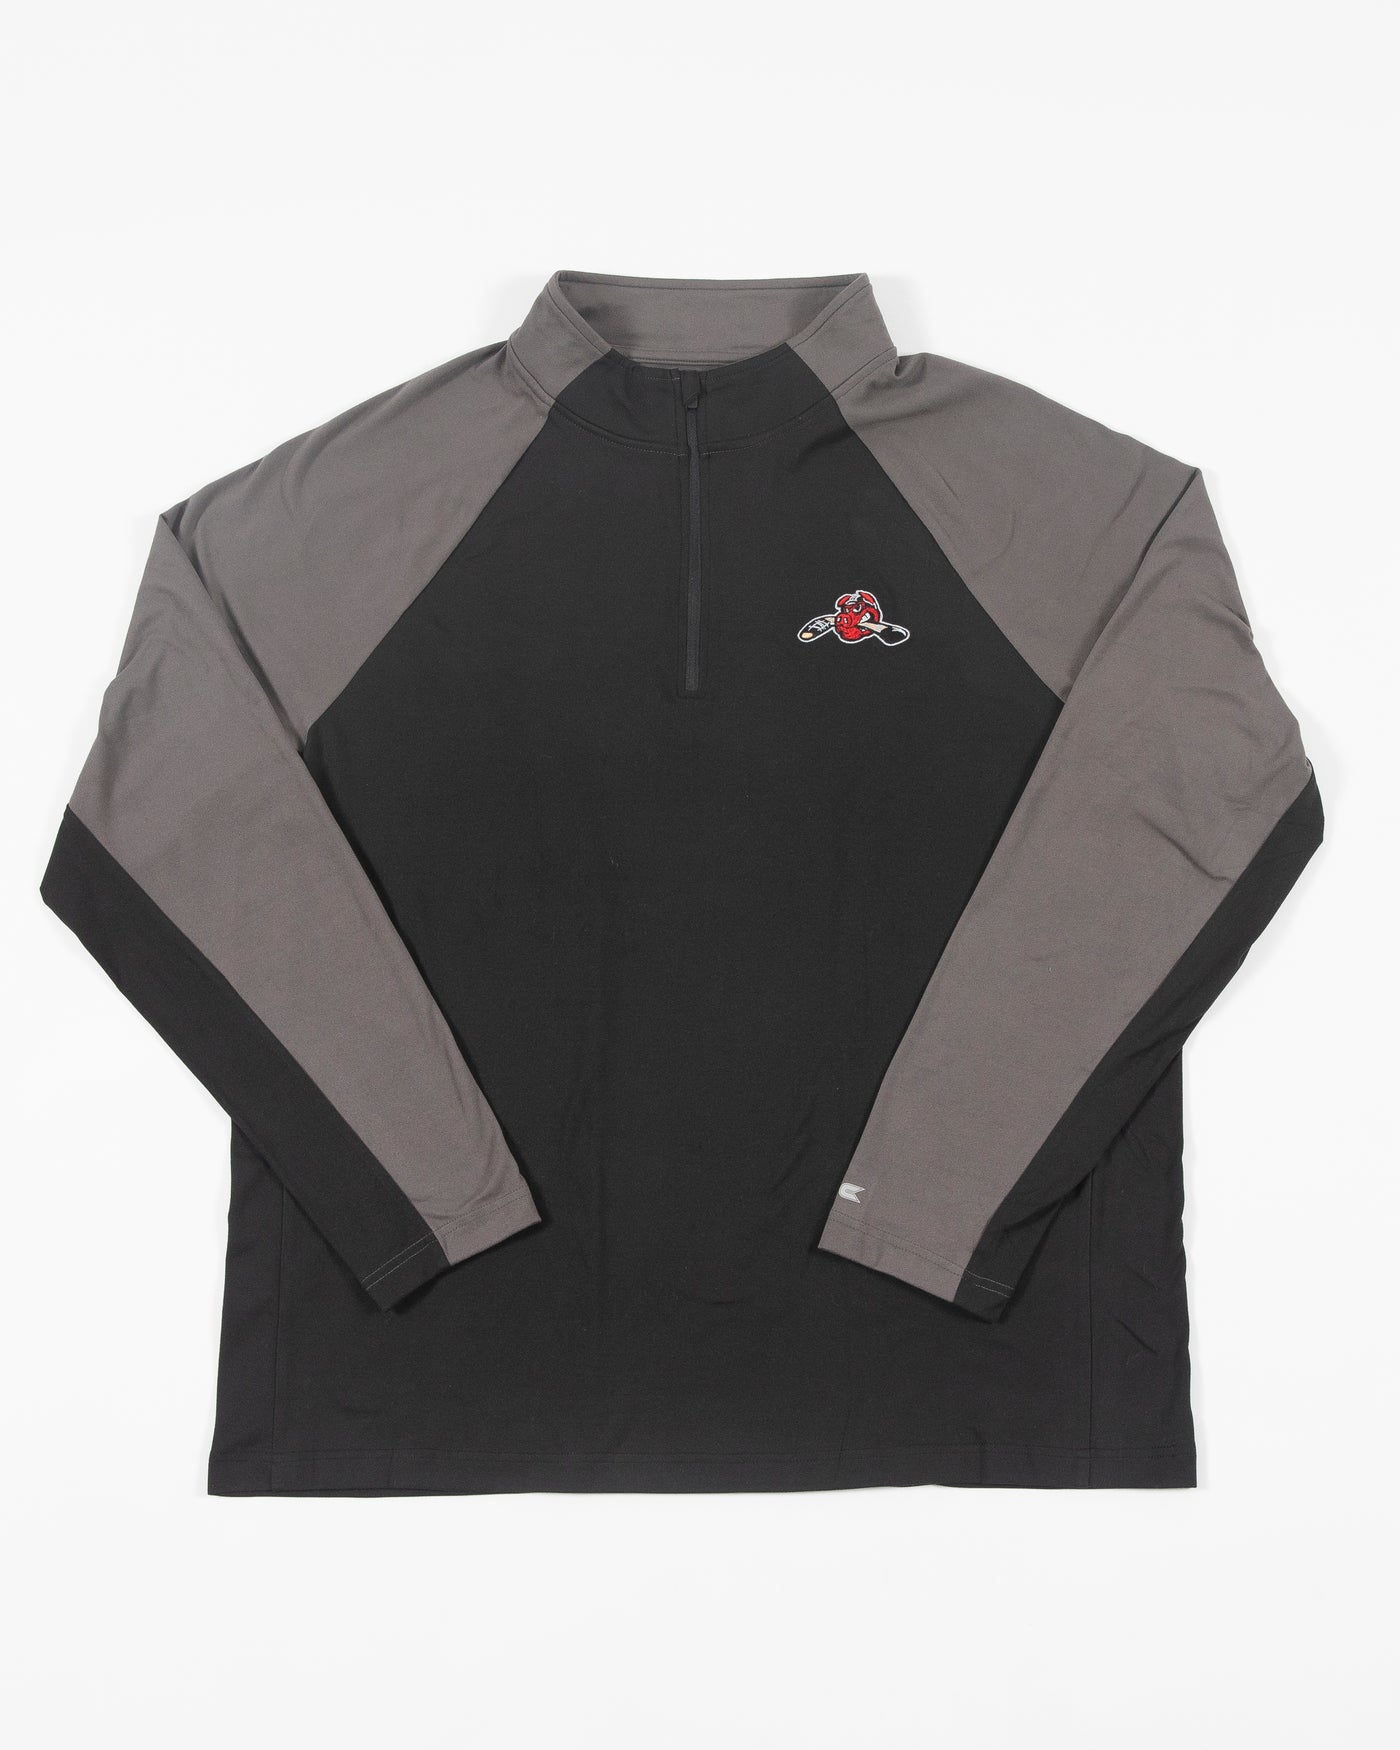 Black and grey two tone Rockford IceHogs Colosseum quarter zip with Hammy embroidered on left chest - front lay flat